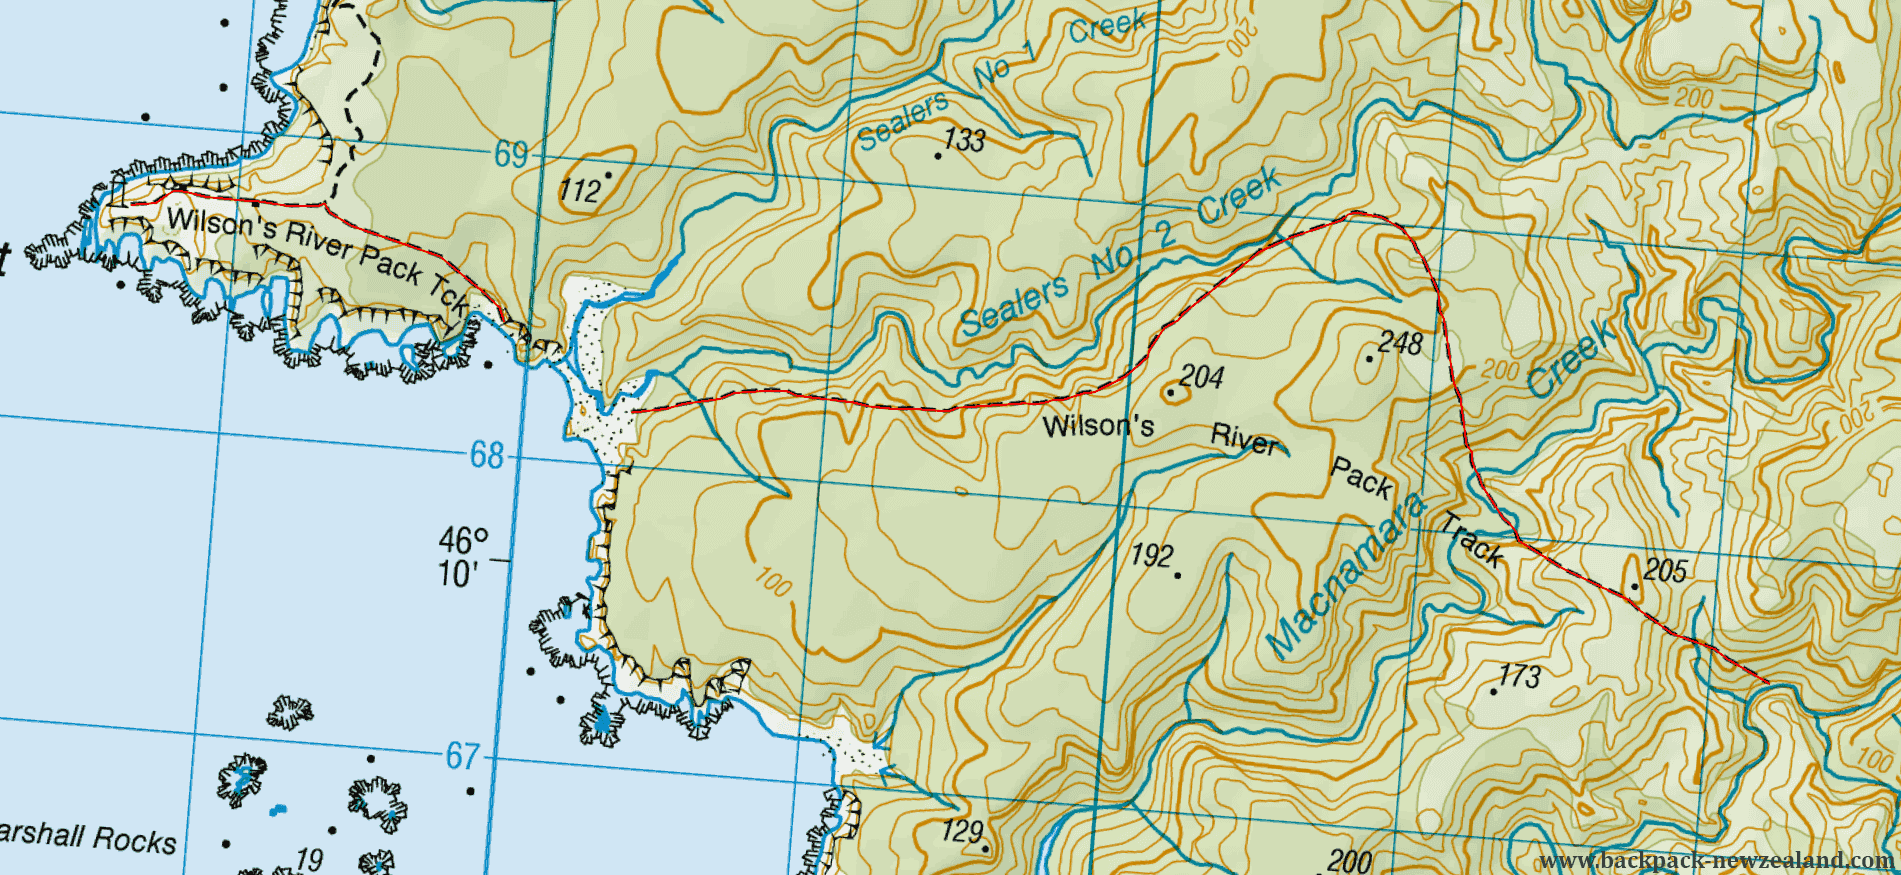 Wilson's River Pack Track Map - New Zealand Tracks